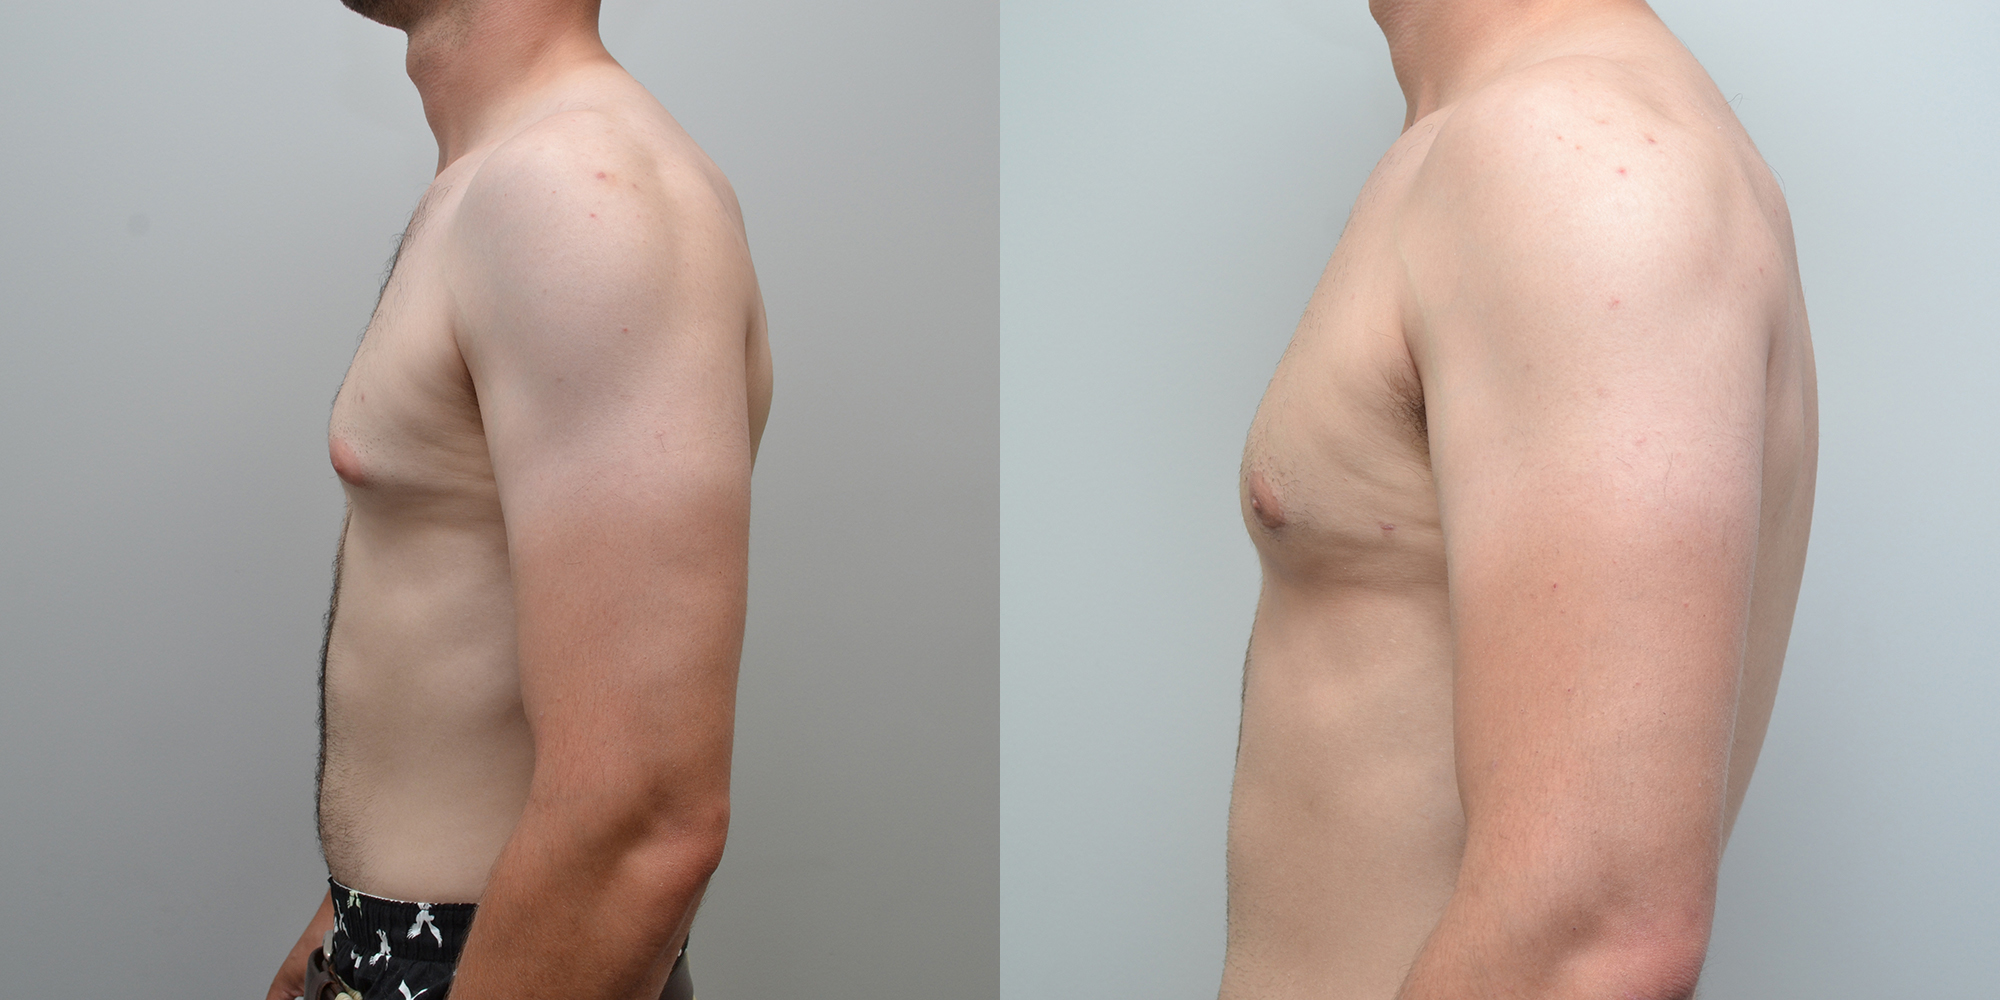 Breast Reduction Before and After photo by Douglas Hargrave, MD of The Plastic Surgery Group in Albany, NY